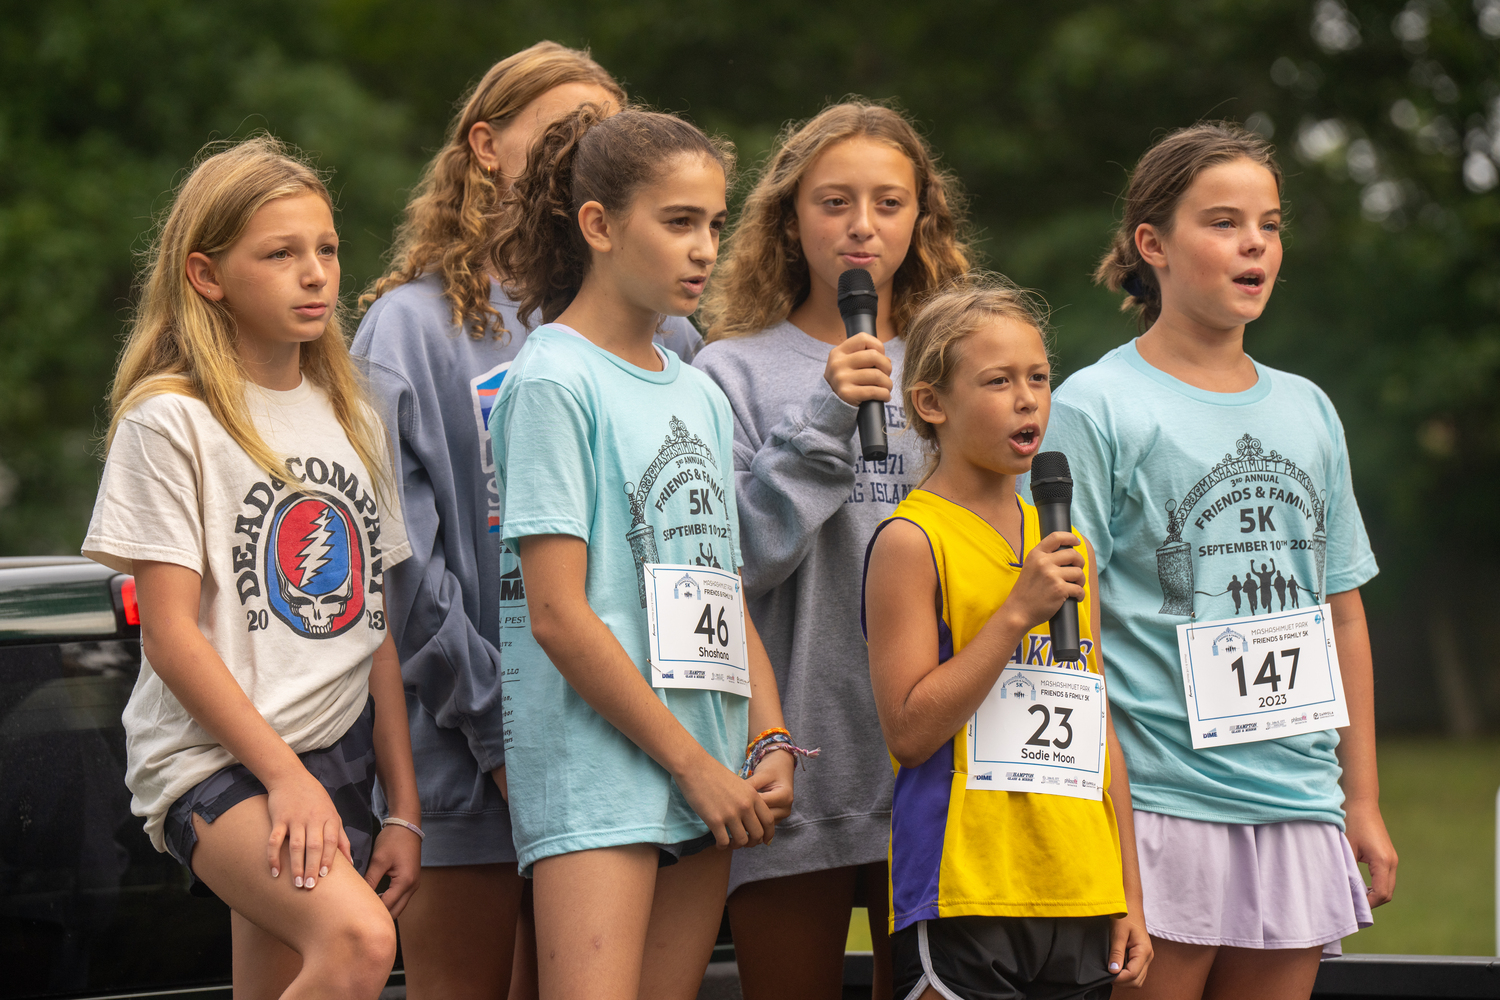 Some of Sag Harbor's youth since the national anthem just prior to Sunday's 5K.   RON ESPOSITO